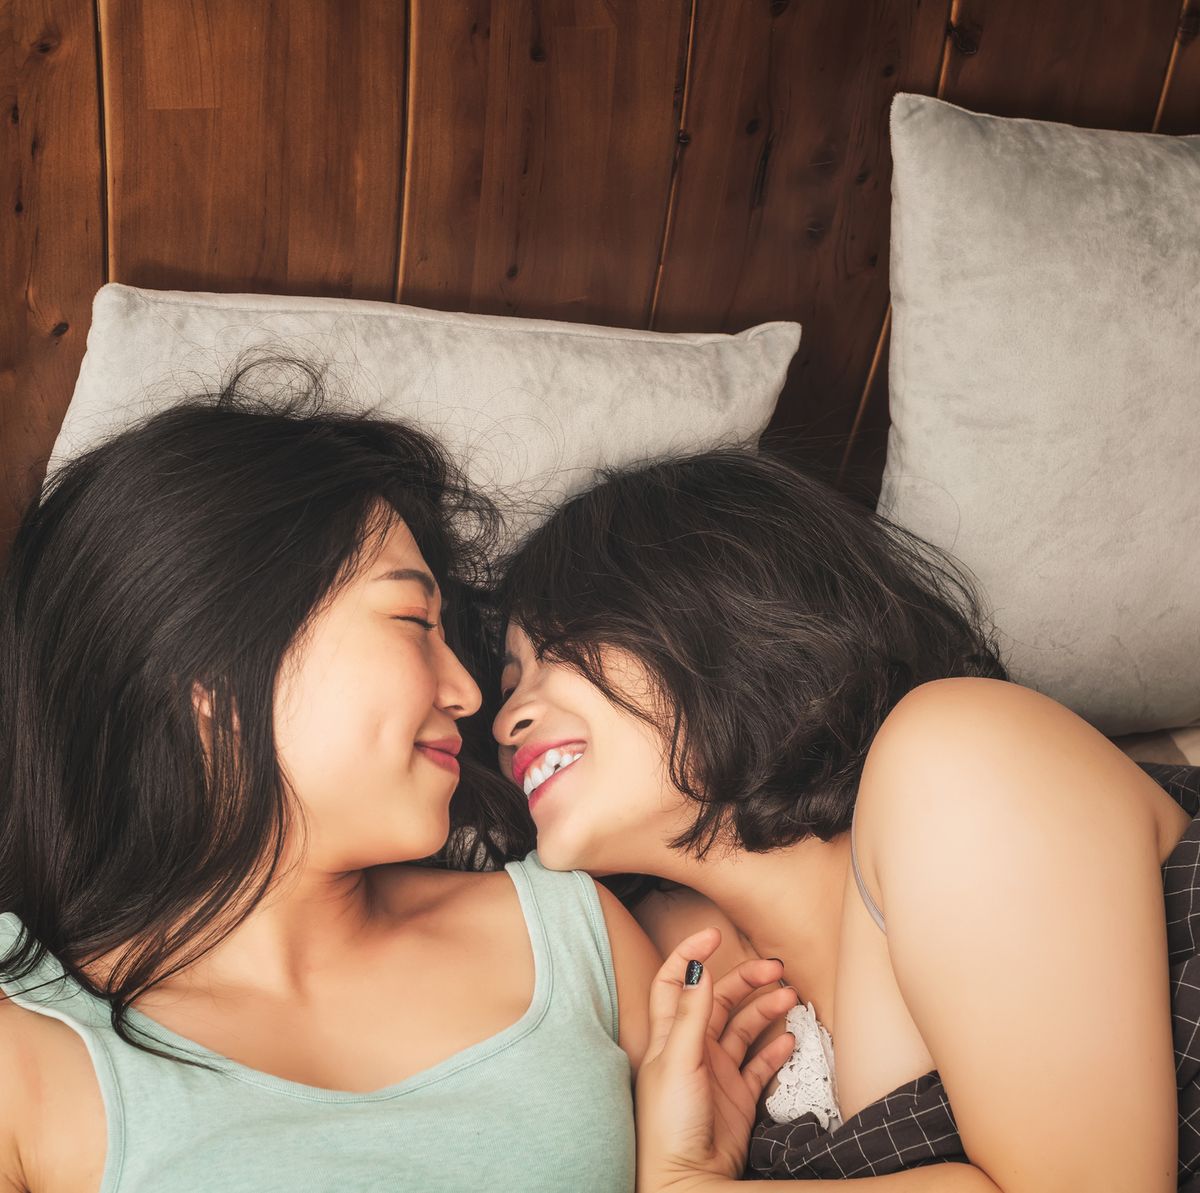 Am I A Lesbian?' - 15 People Share How They Knew Their Sexuality